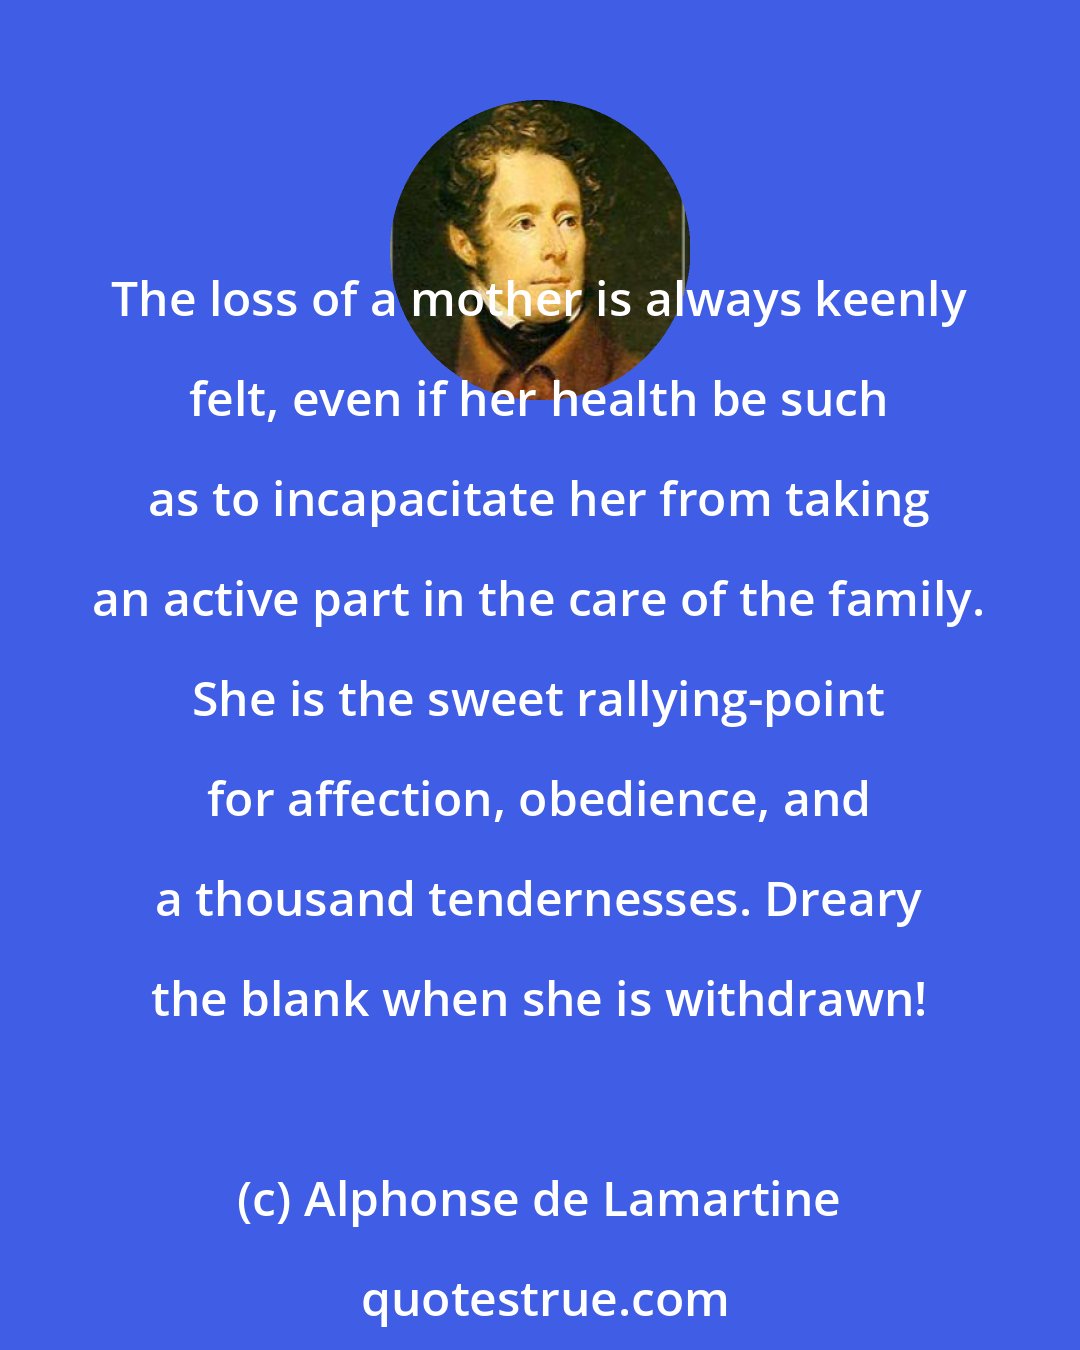 Alphonse de Lamartine: The loss of a mother is always keenly felt, even if her health be such as to incapacitate her from taking an active part in the care of the family. She is the sweet rallying-point for affection, obedience, and a thousand tendernesses. Dreary the blank when she is withdrawn!